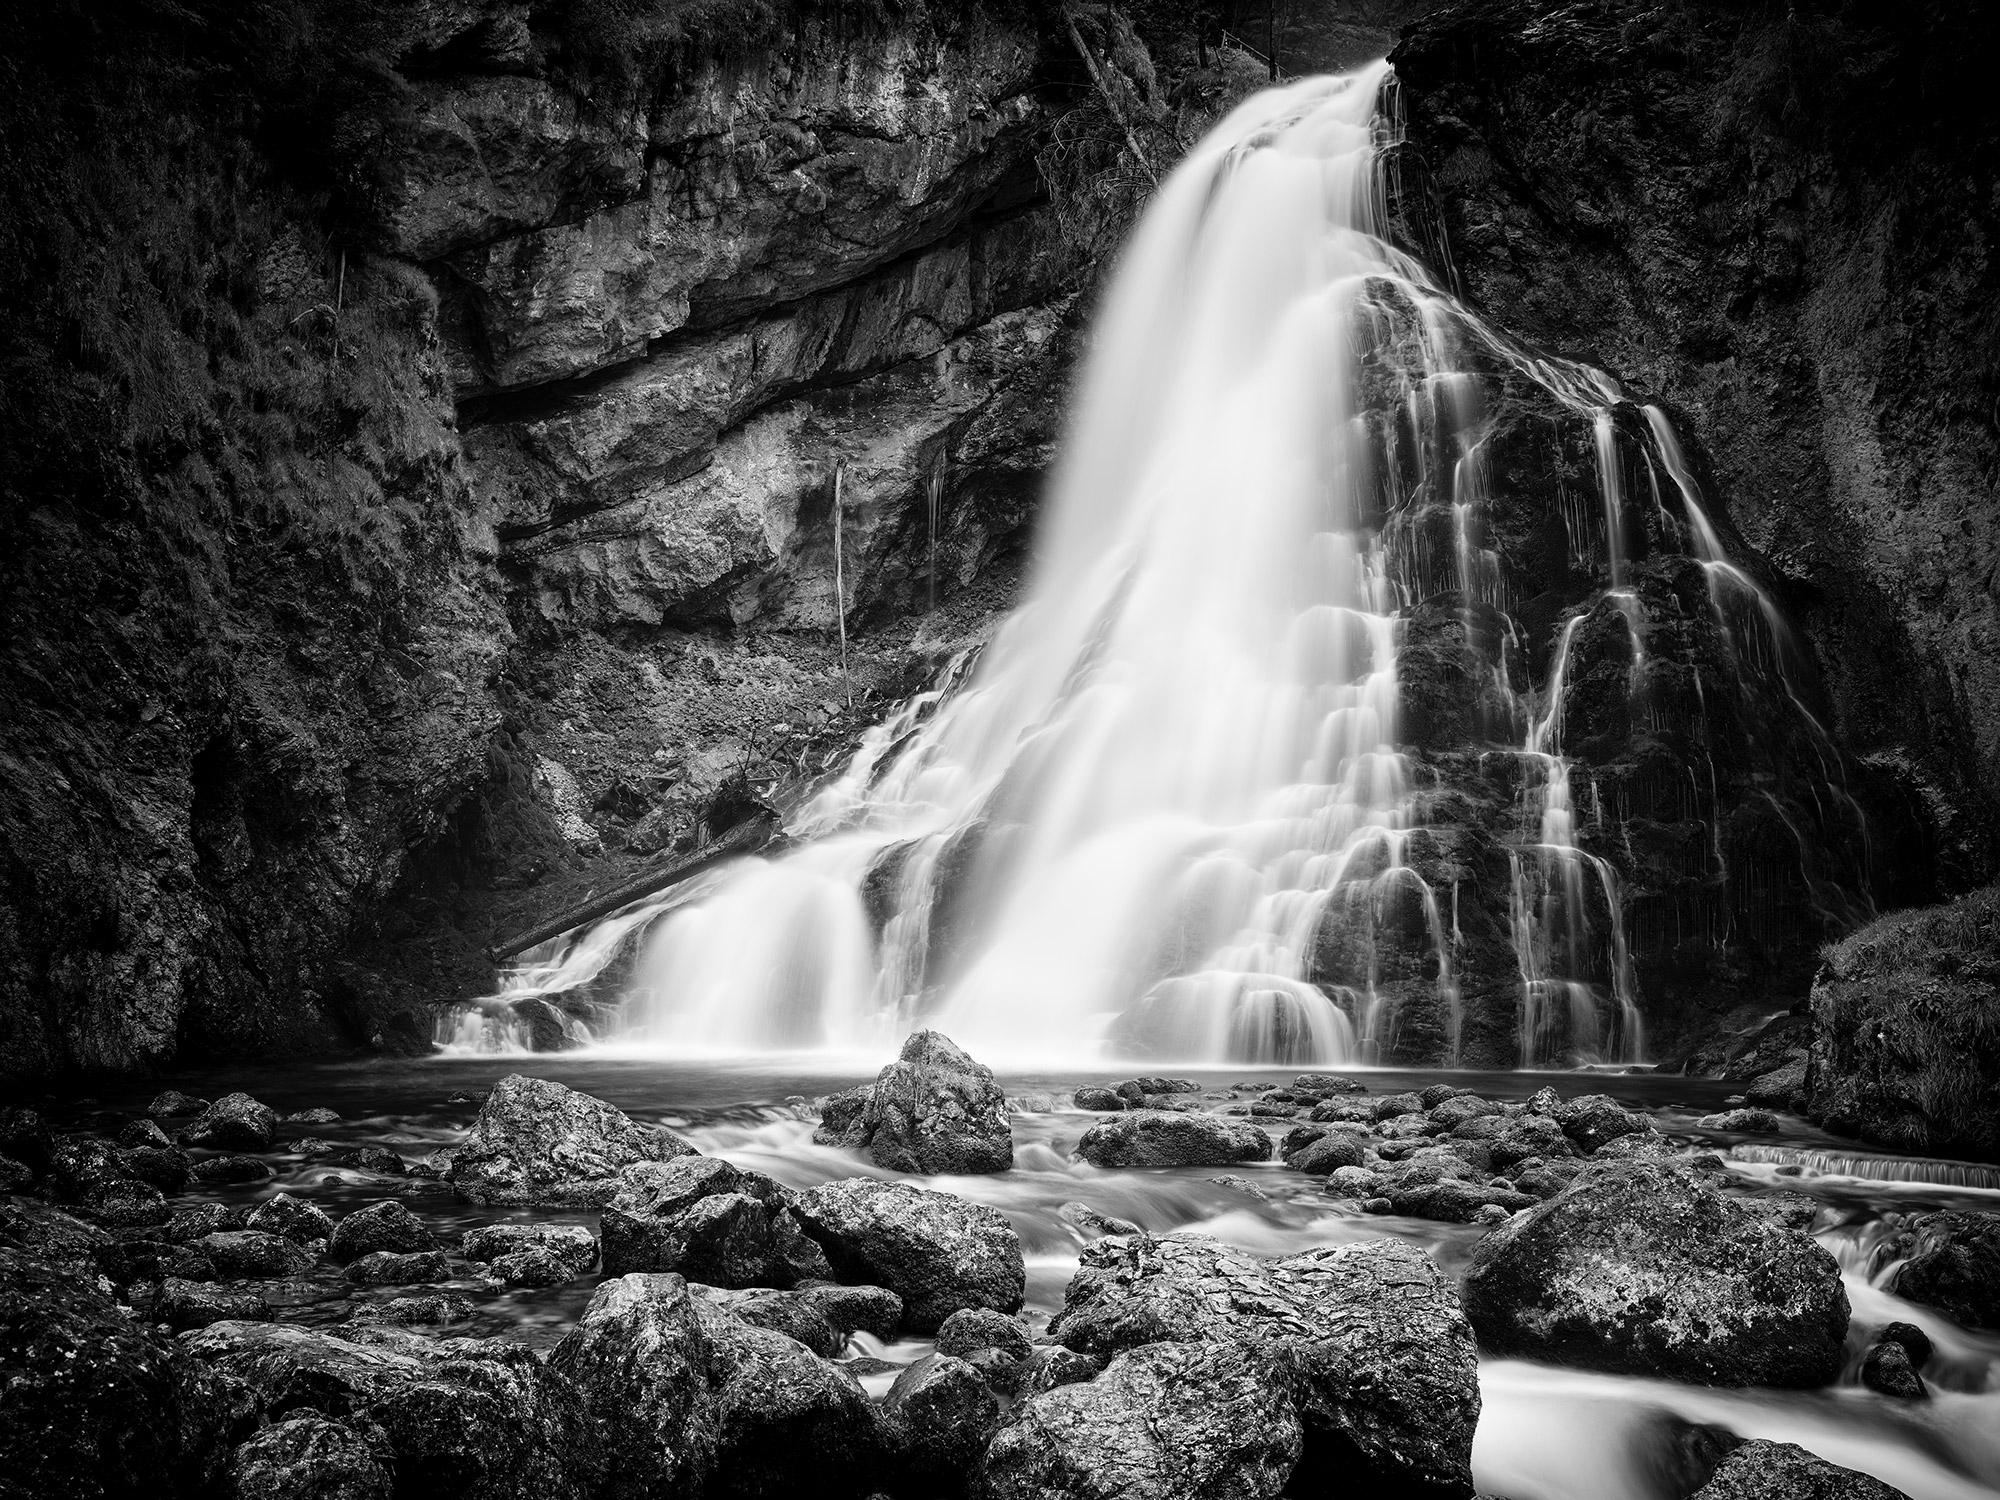 Gerald Berghammer Landscape Photograph - Golling Falls, mountain waterfall, black and white landscape fineart photography